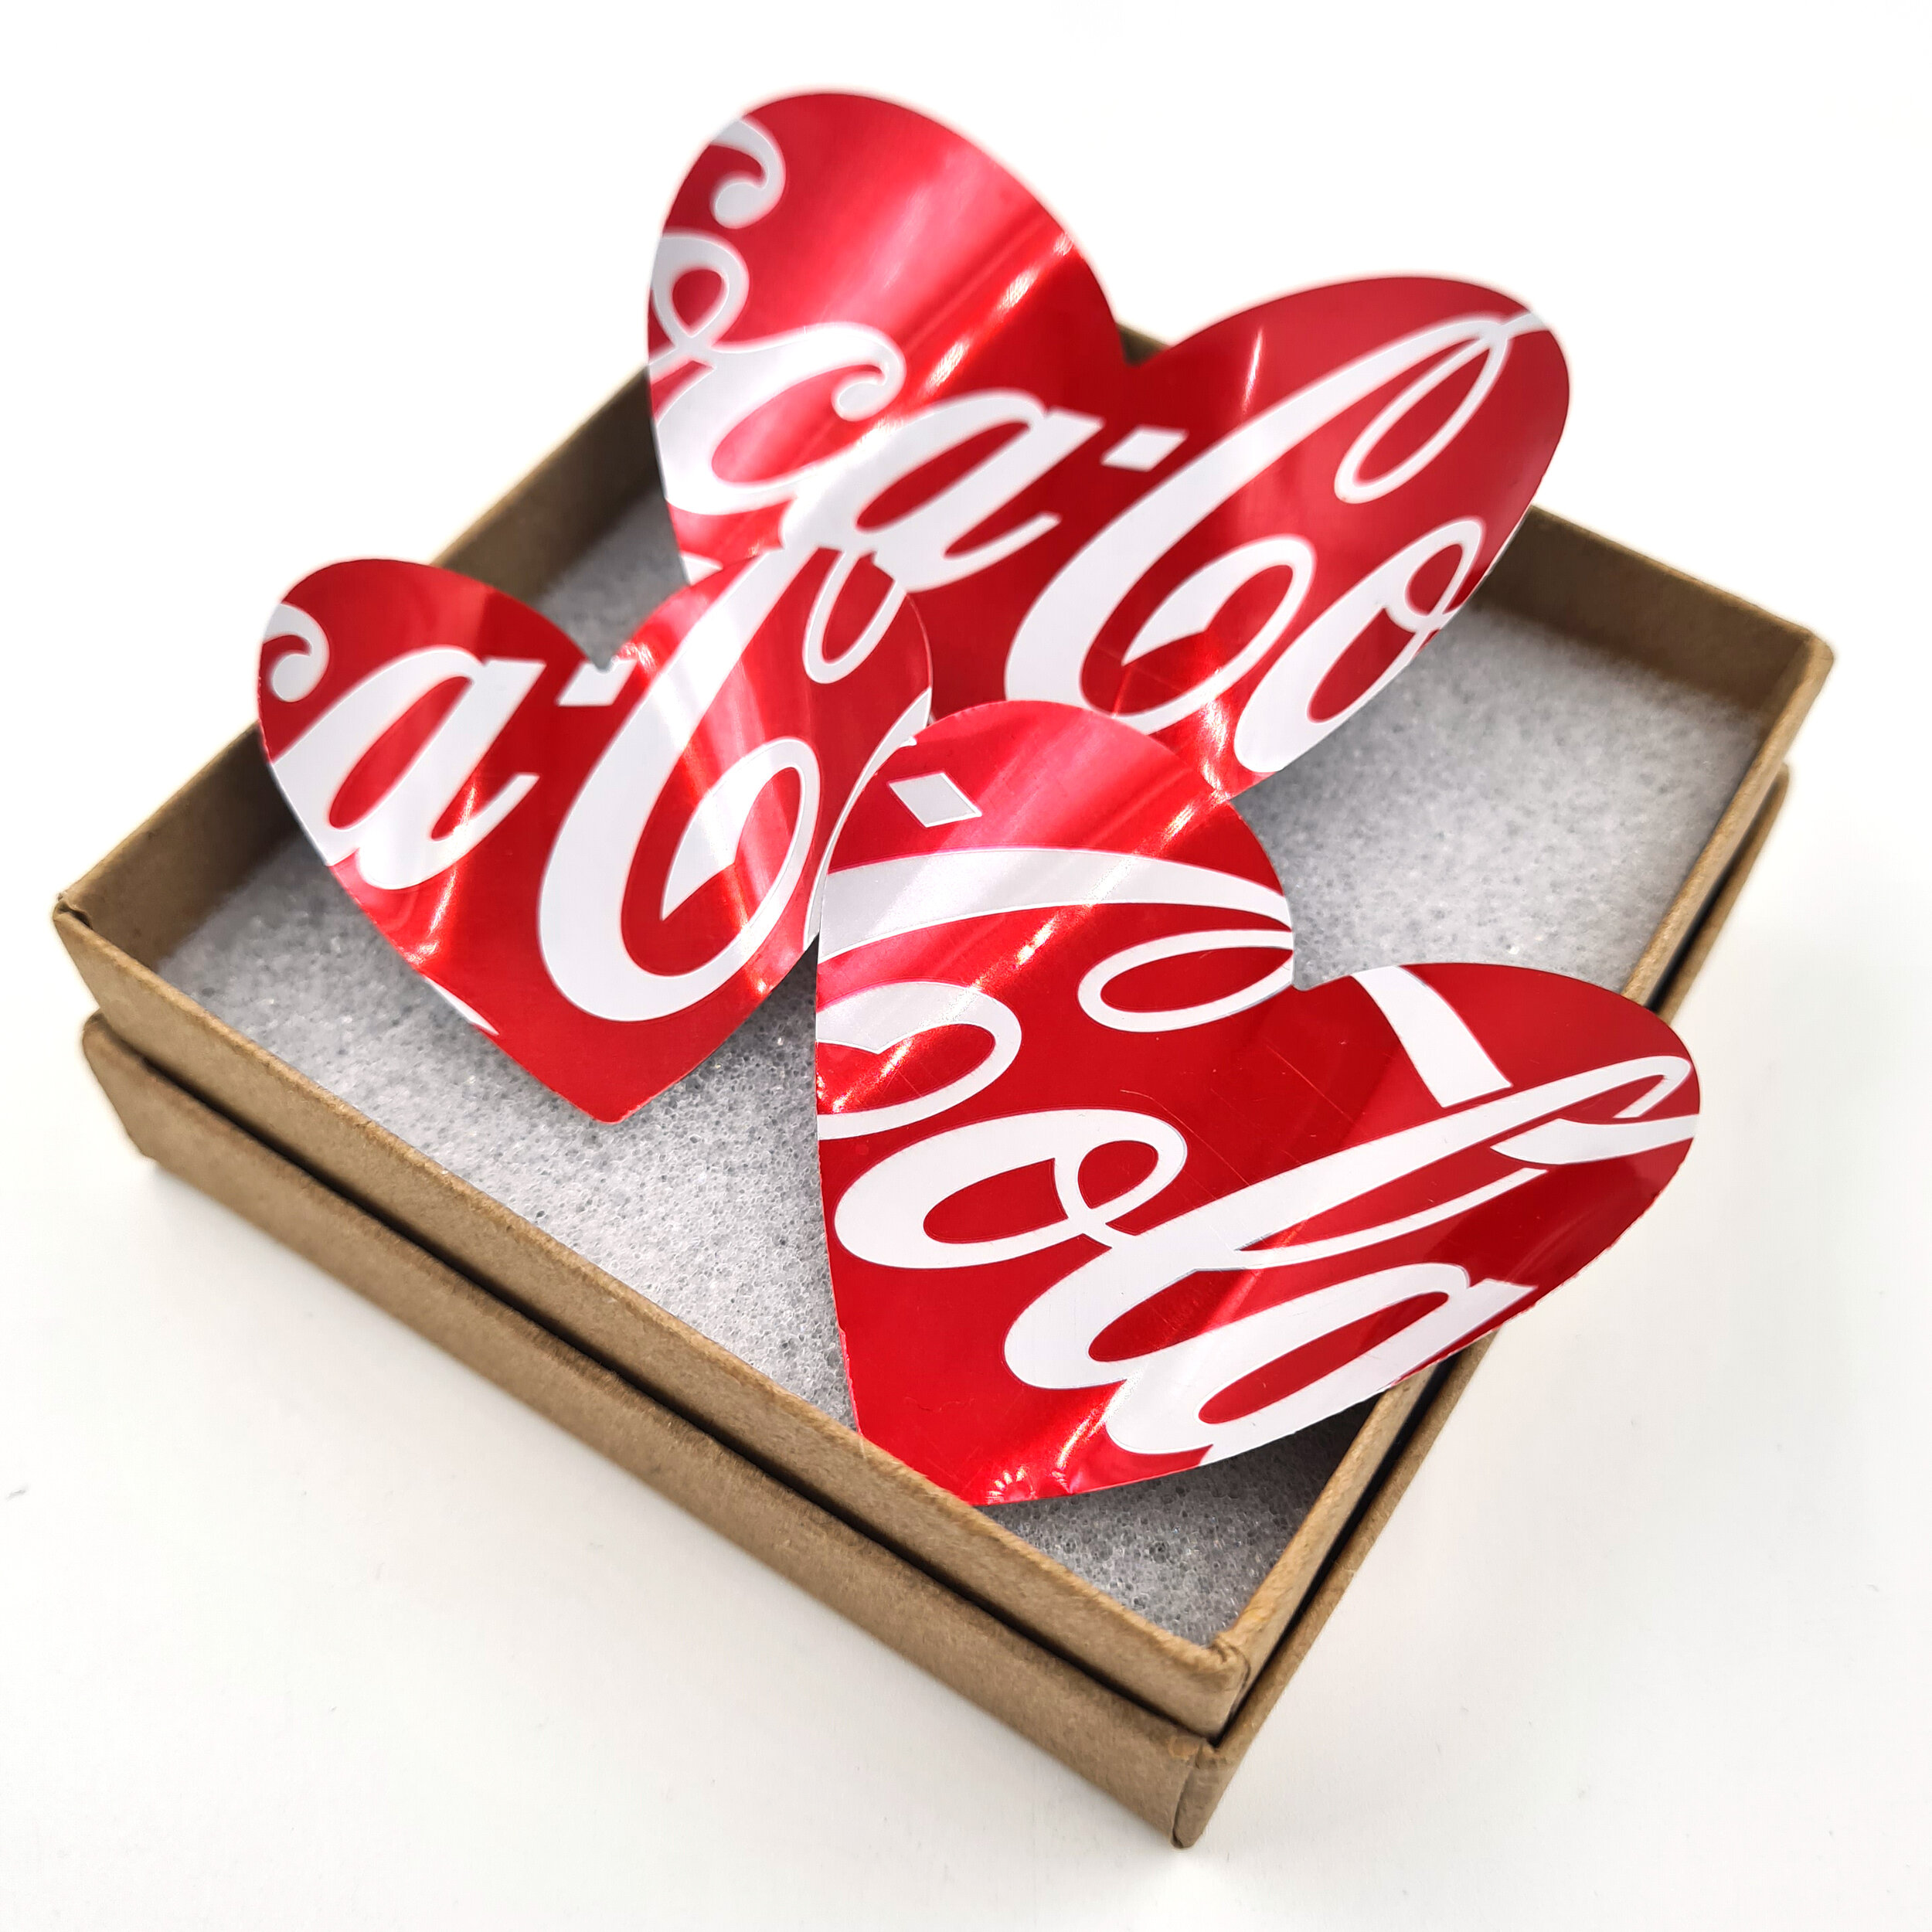 Coca-Cola Heart eco Can Magnets hand made in UK in sustainable box 